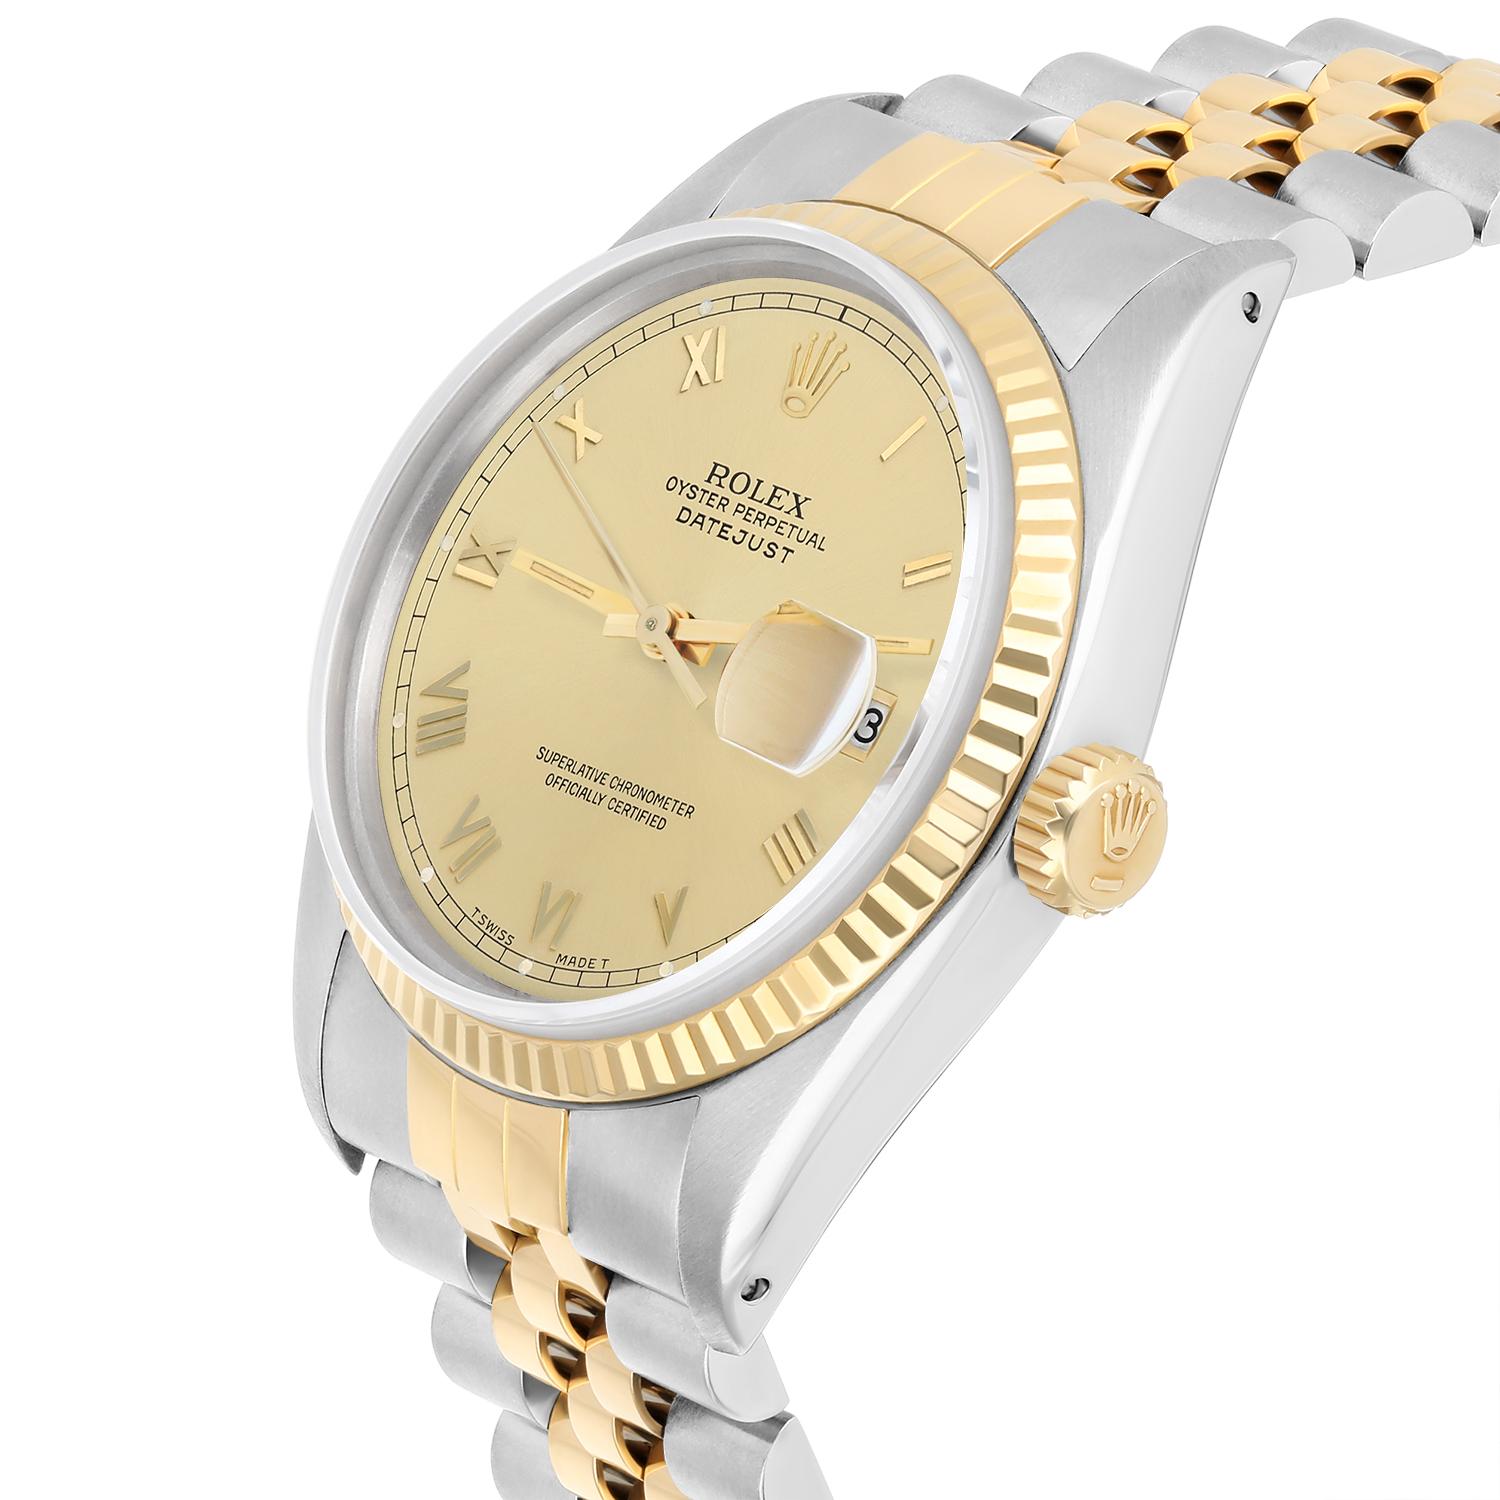 Rolex Datejust 36mm Two Tone Champagne Roman Dial Jubilee 16233 Circa 1991 For Sale 2